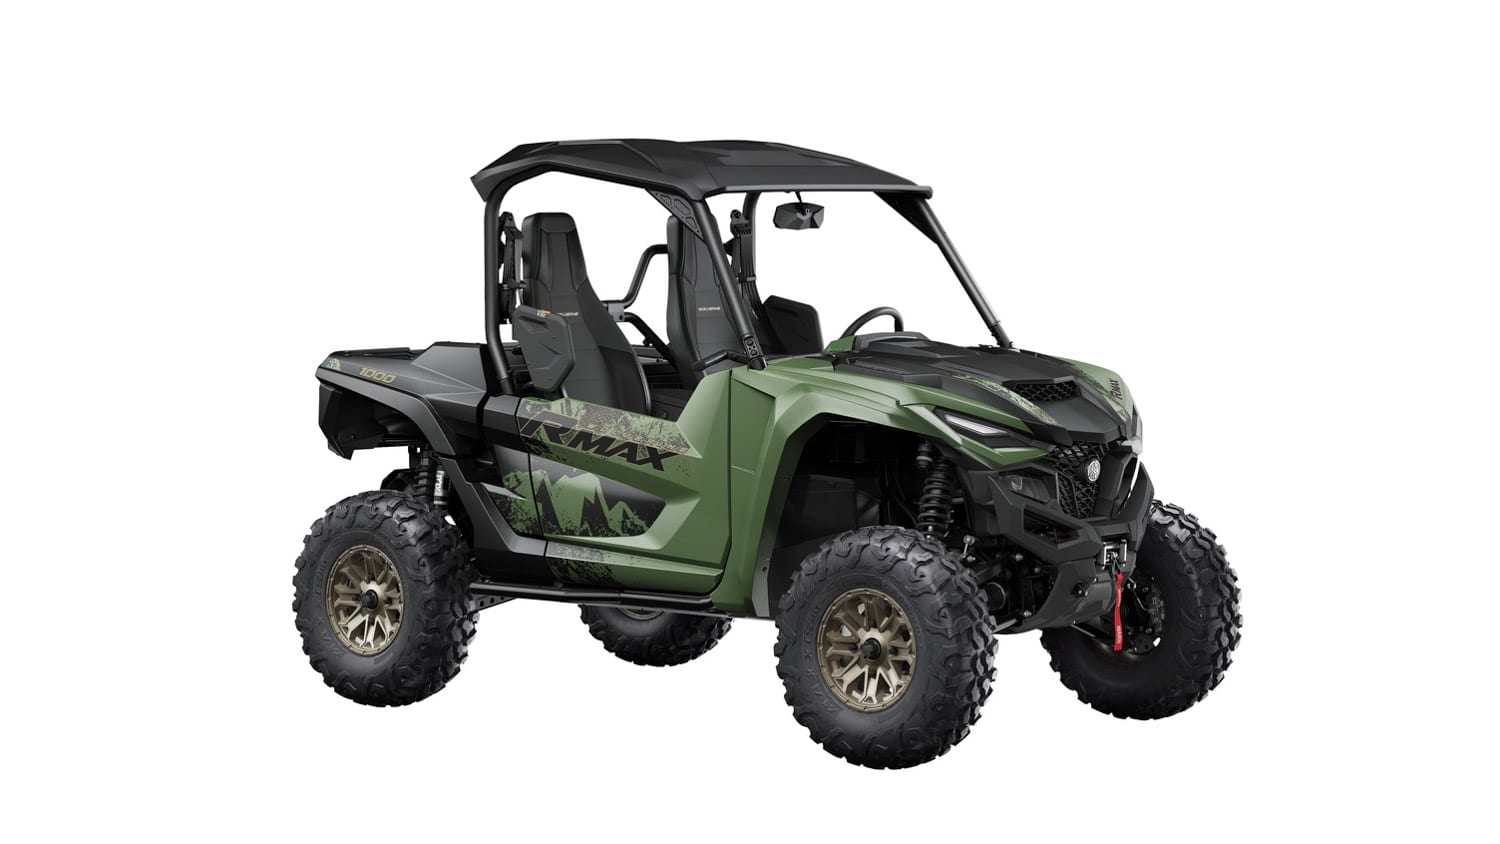 Yamaha Motor introduces the 2021 Side-by-Side (SxS) and ATV lineup of Proven Off-Road vehicles.